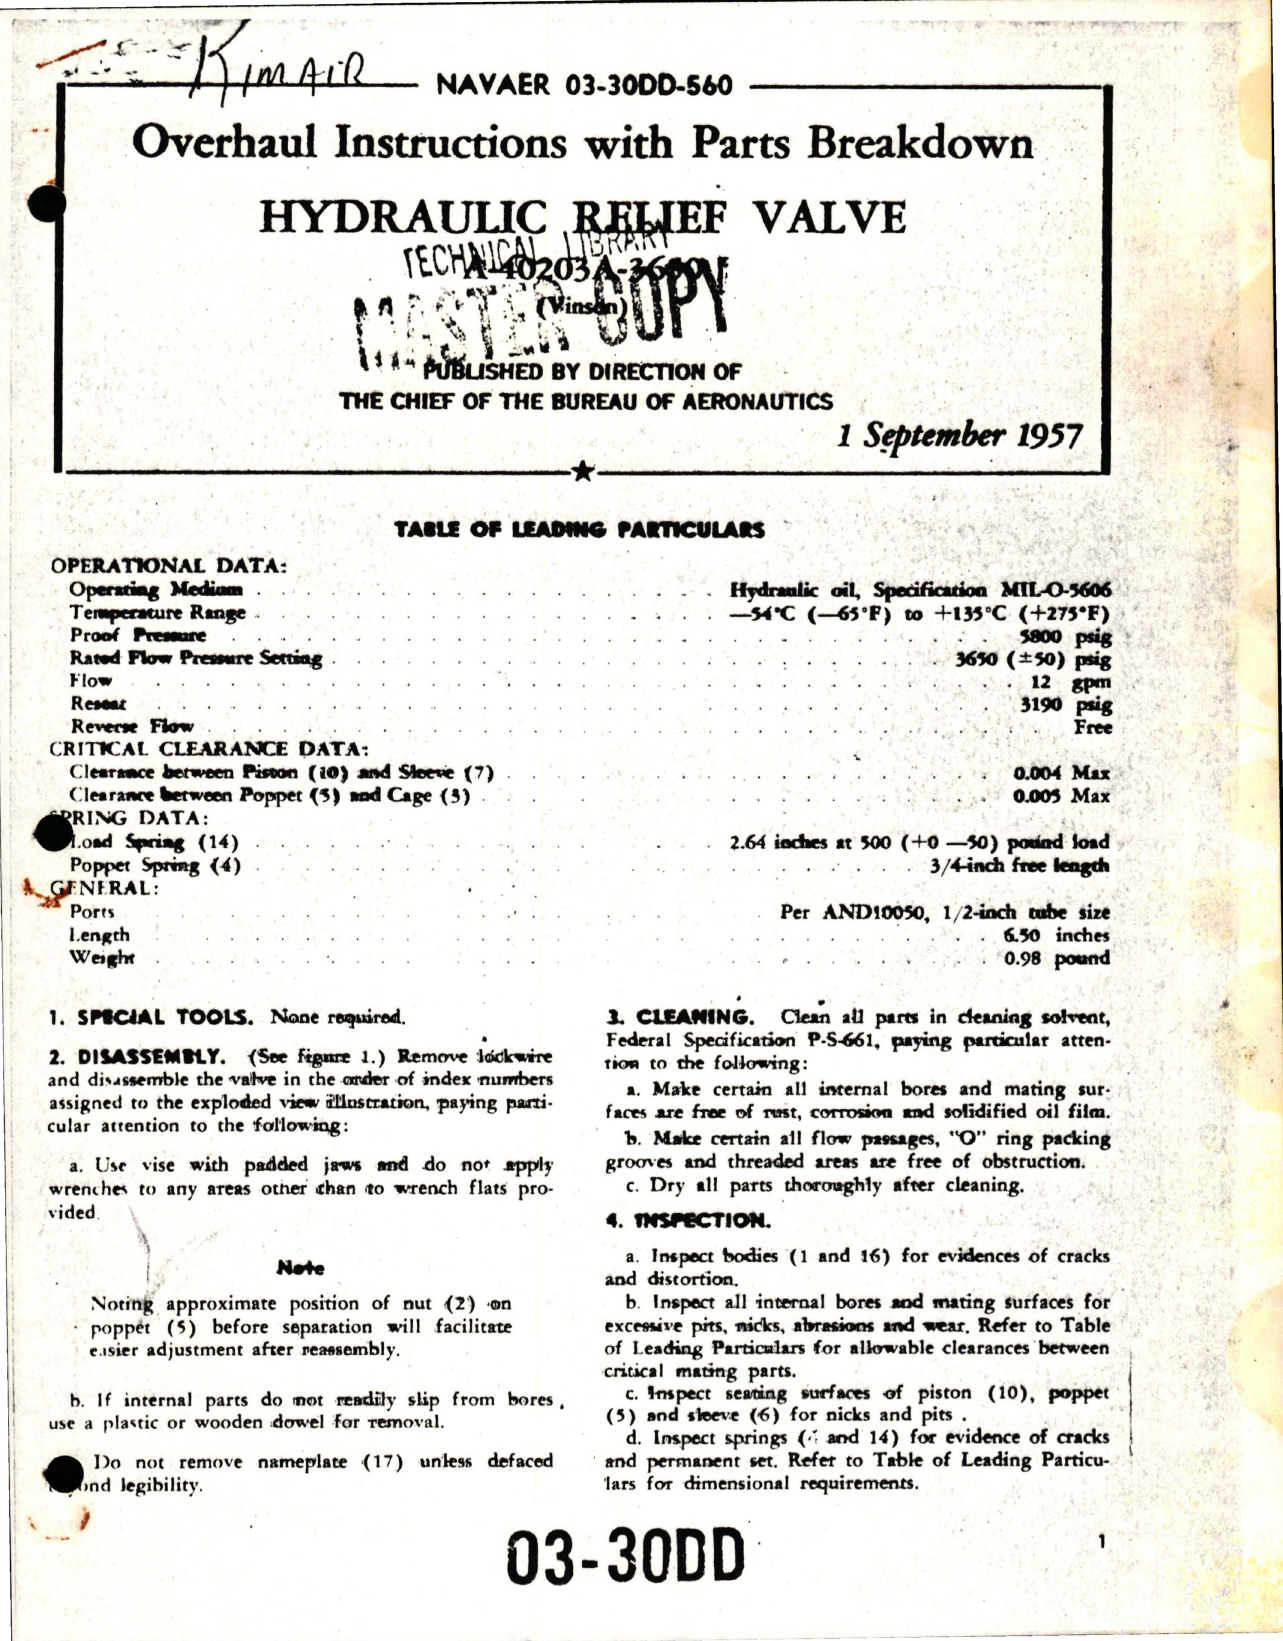 Sample page 1 from AirCorps Library document: Overhaul Instructions with Parts Breakdown for Hydraulic Relief Valve - A-40203A-3650